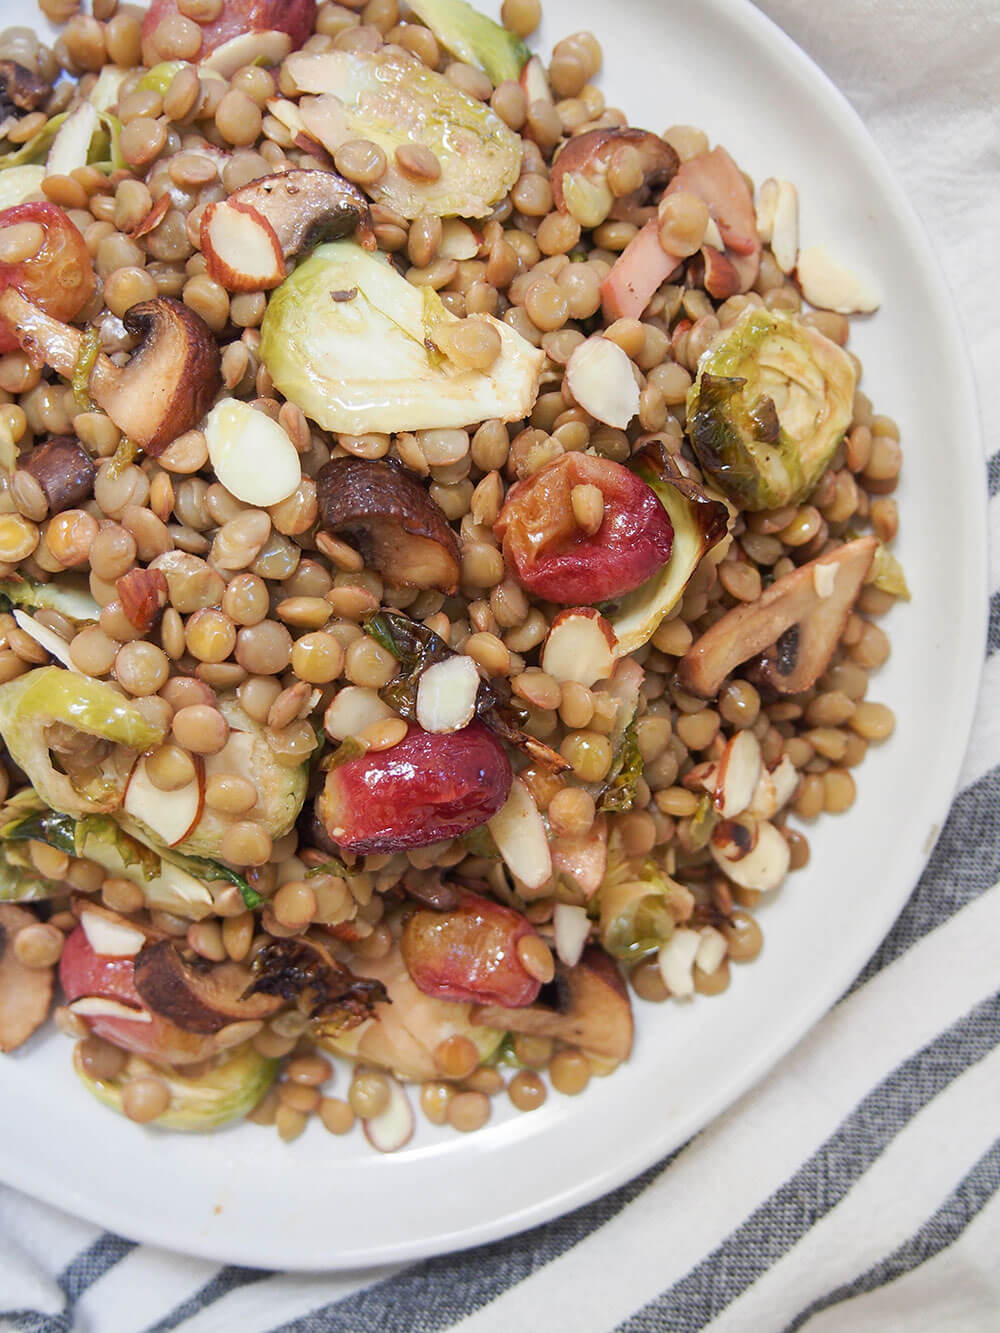 vegan lentil salad with roasted Brussels sprouts, grapes and mushroom viewed from overhead